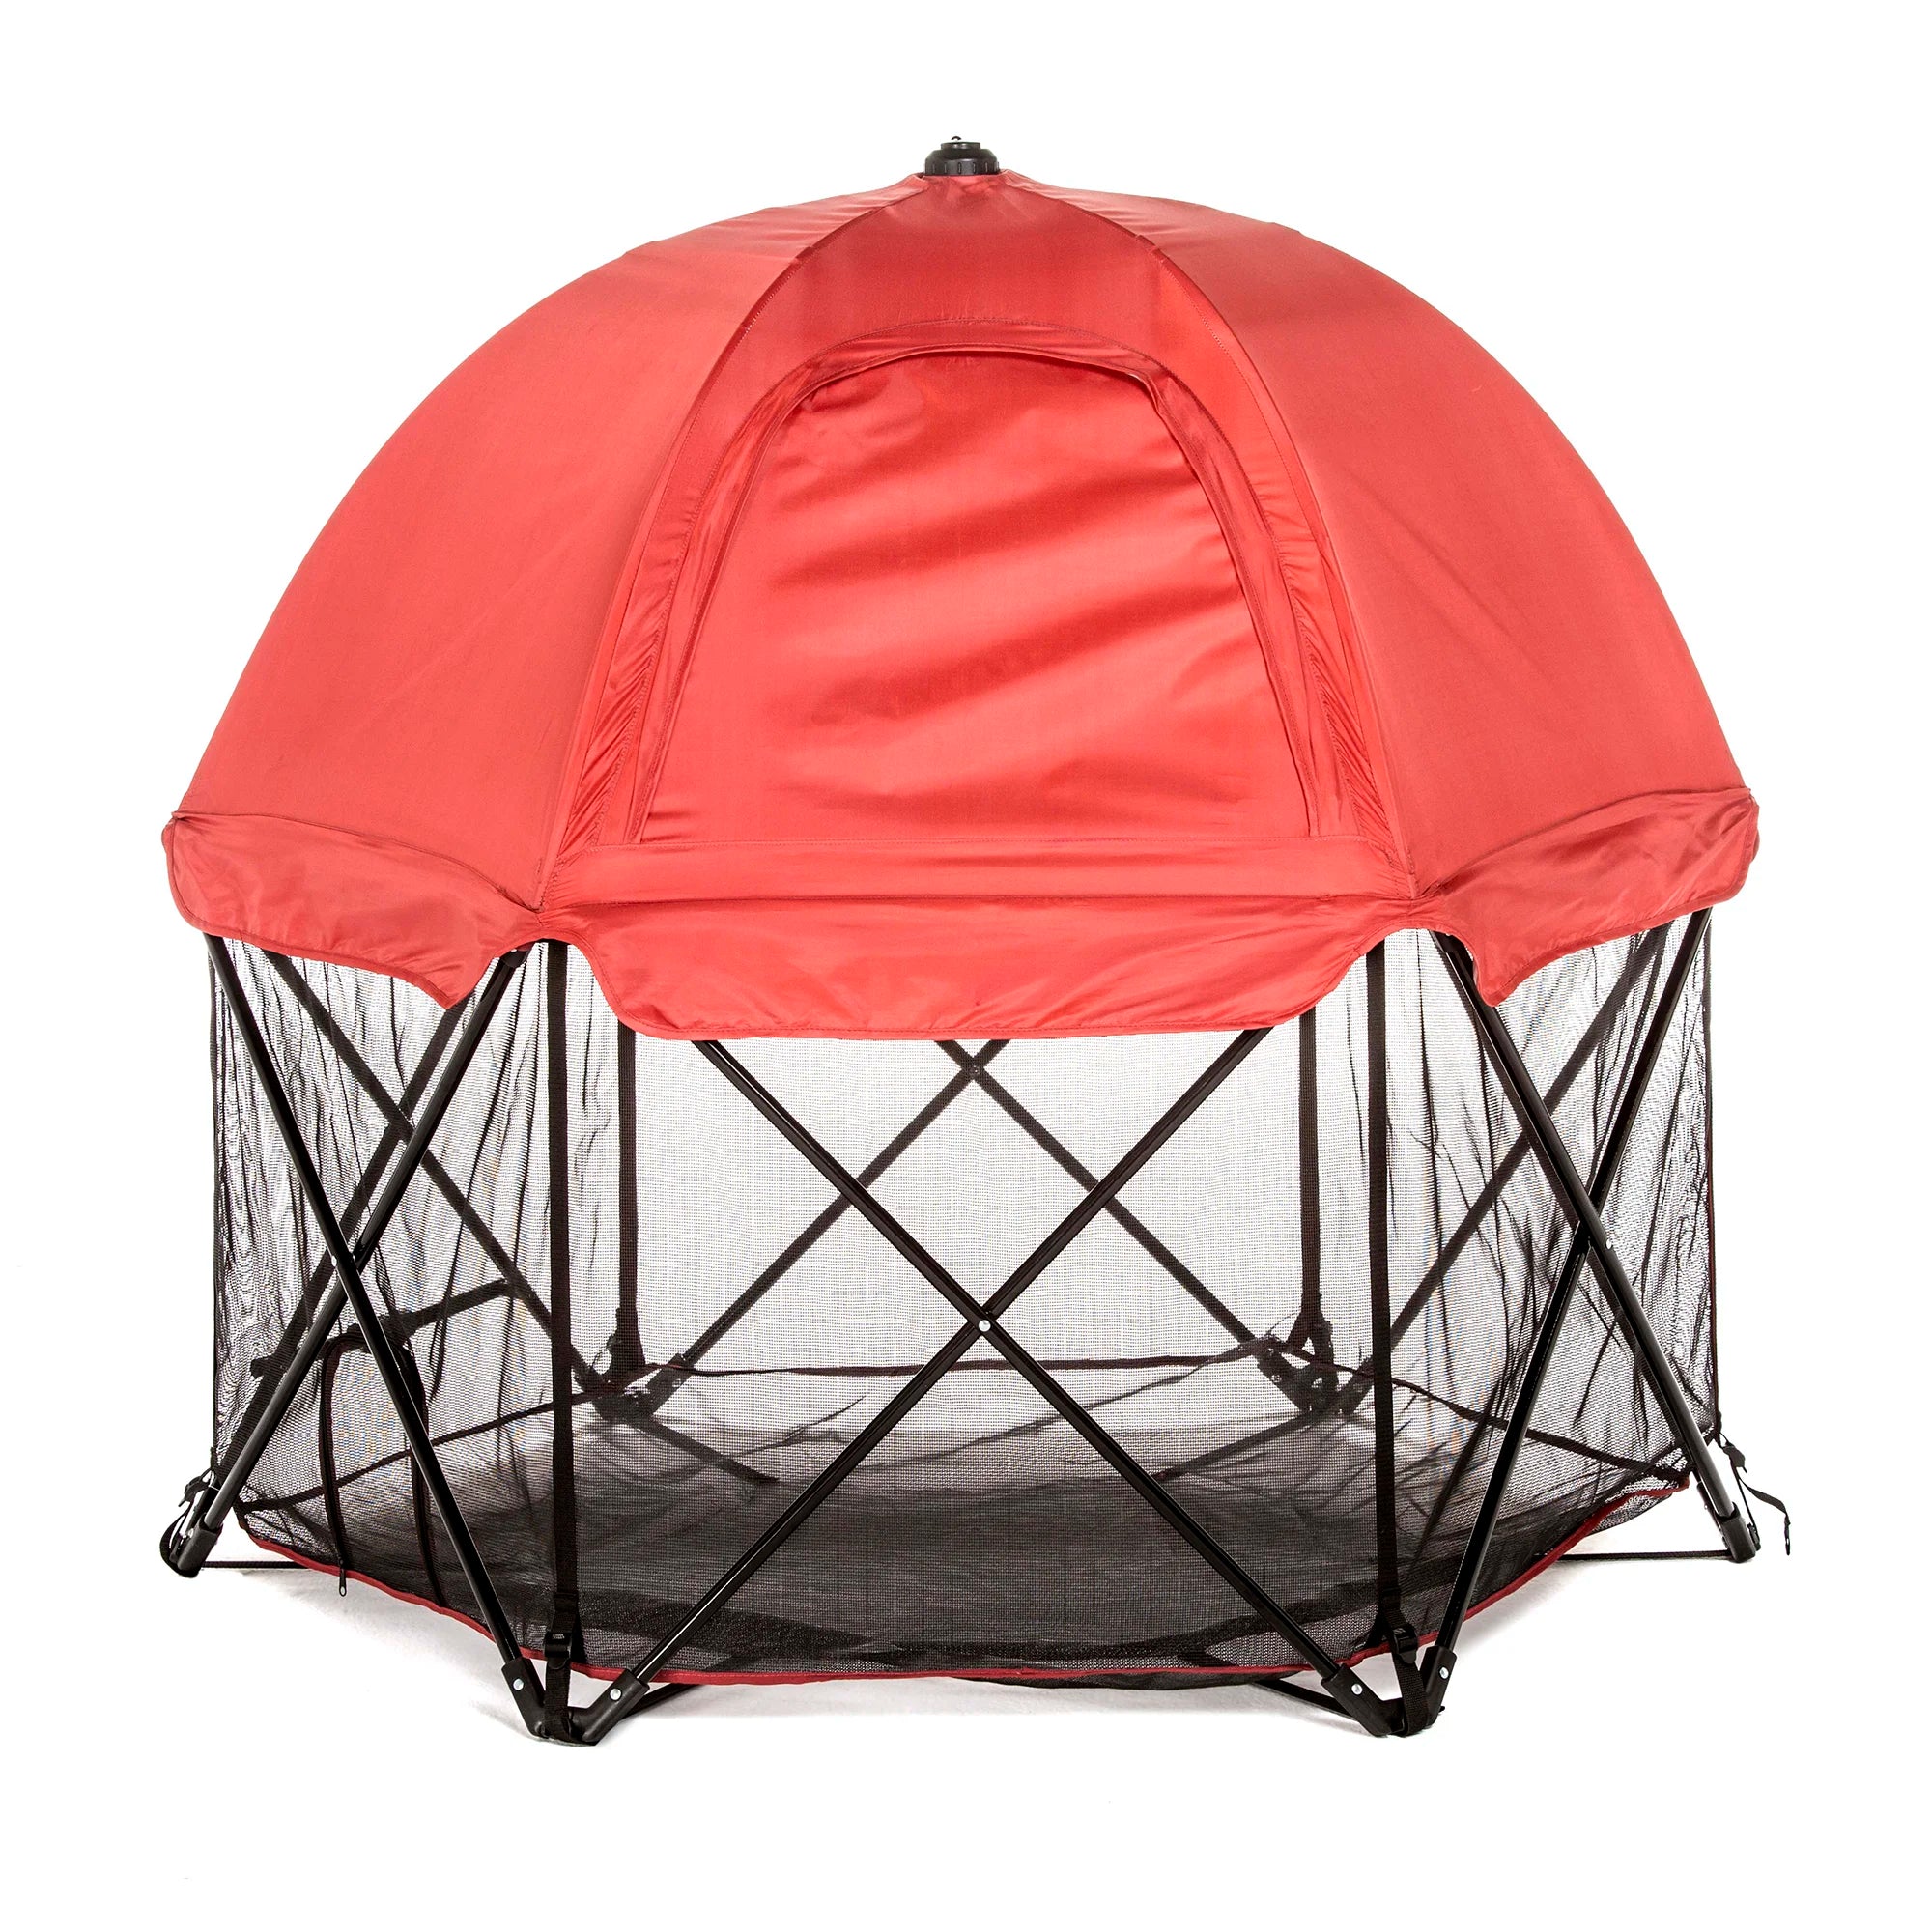 Portable Pet Pen with Canopy on white background.